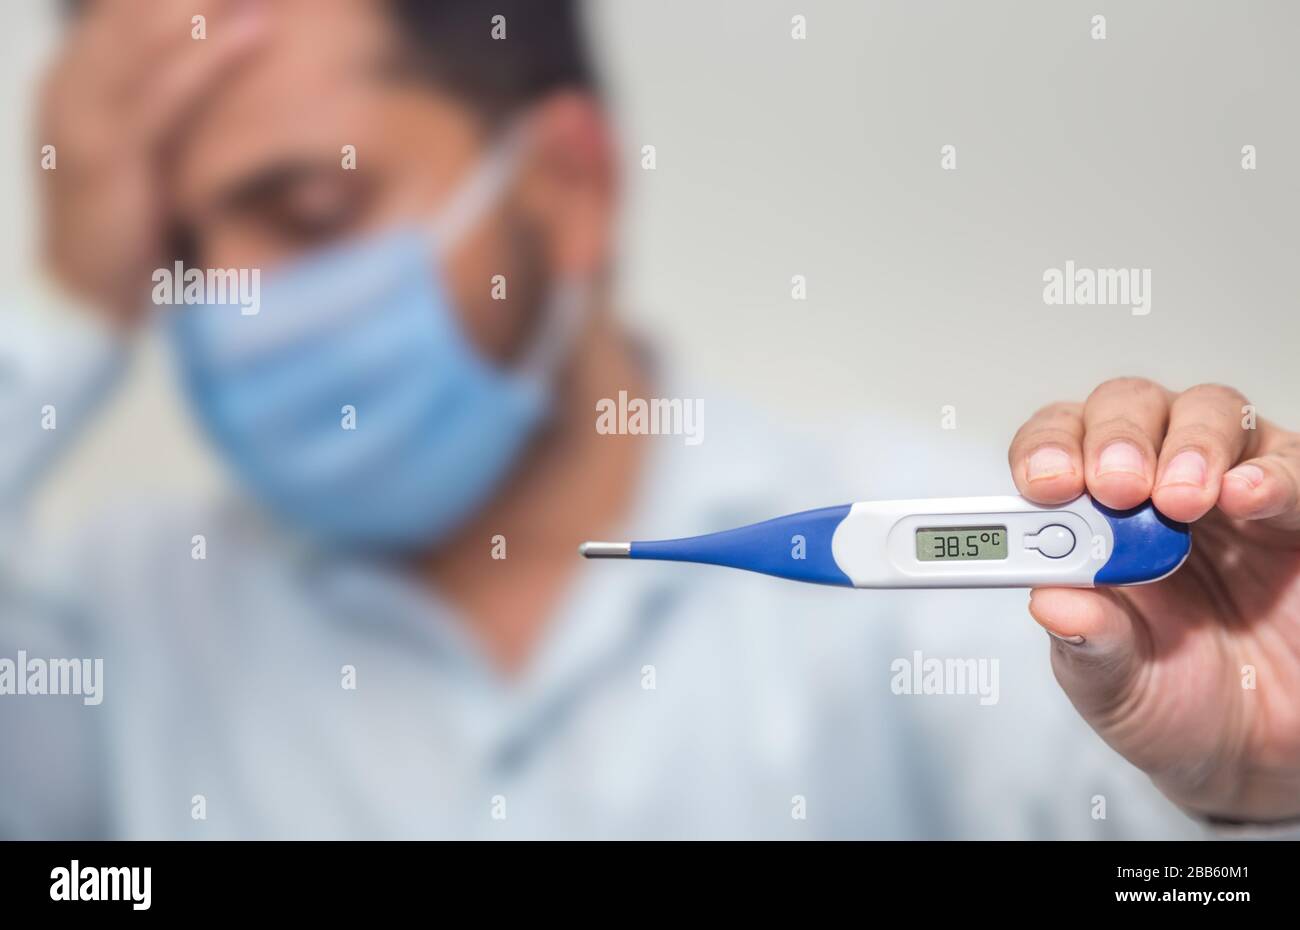 Novel corona virus COVID-19 -Sad man with tensed face holding digital thermometer, wearing a disposable mask, measuring body temperature. concept of c Stock Photo